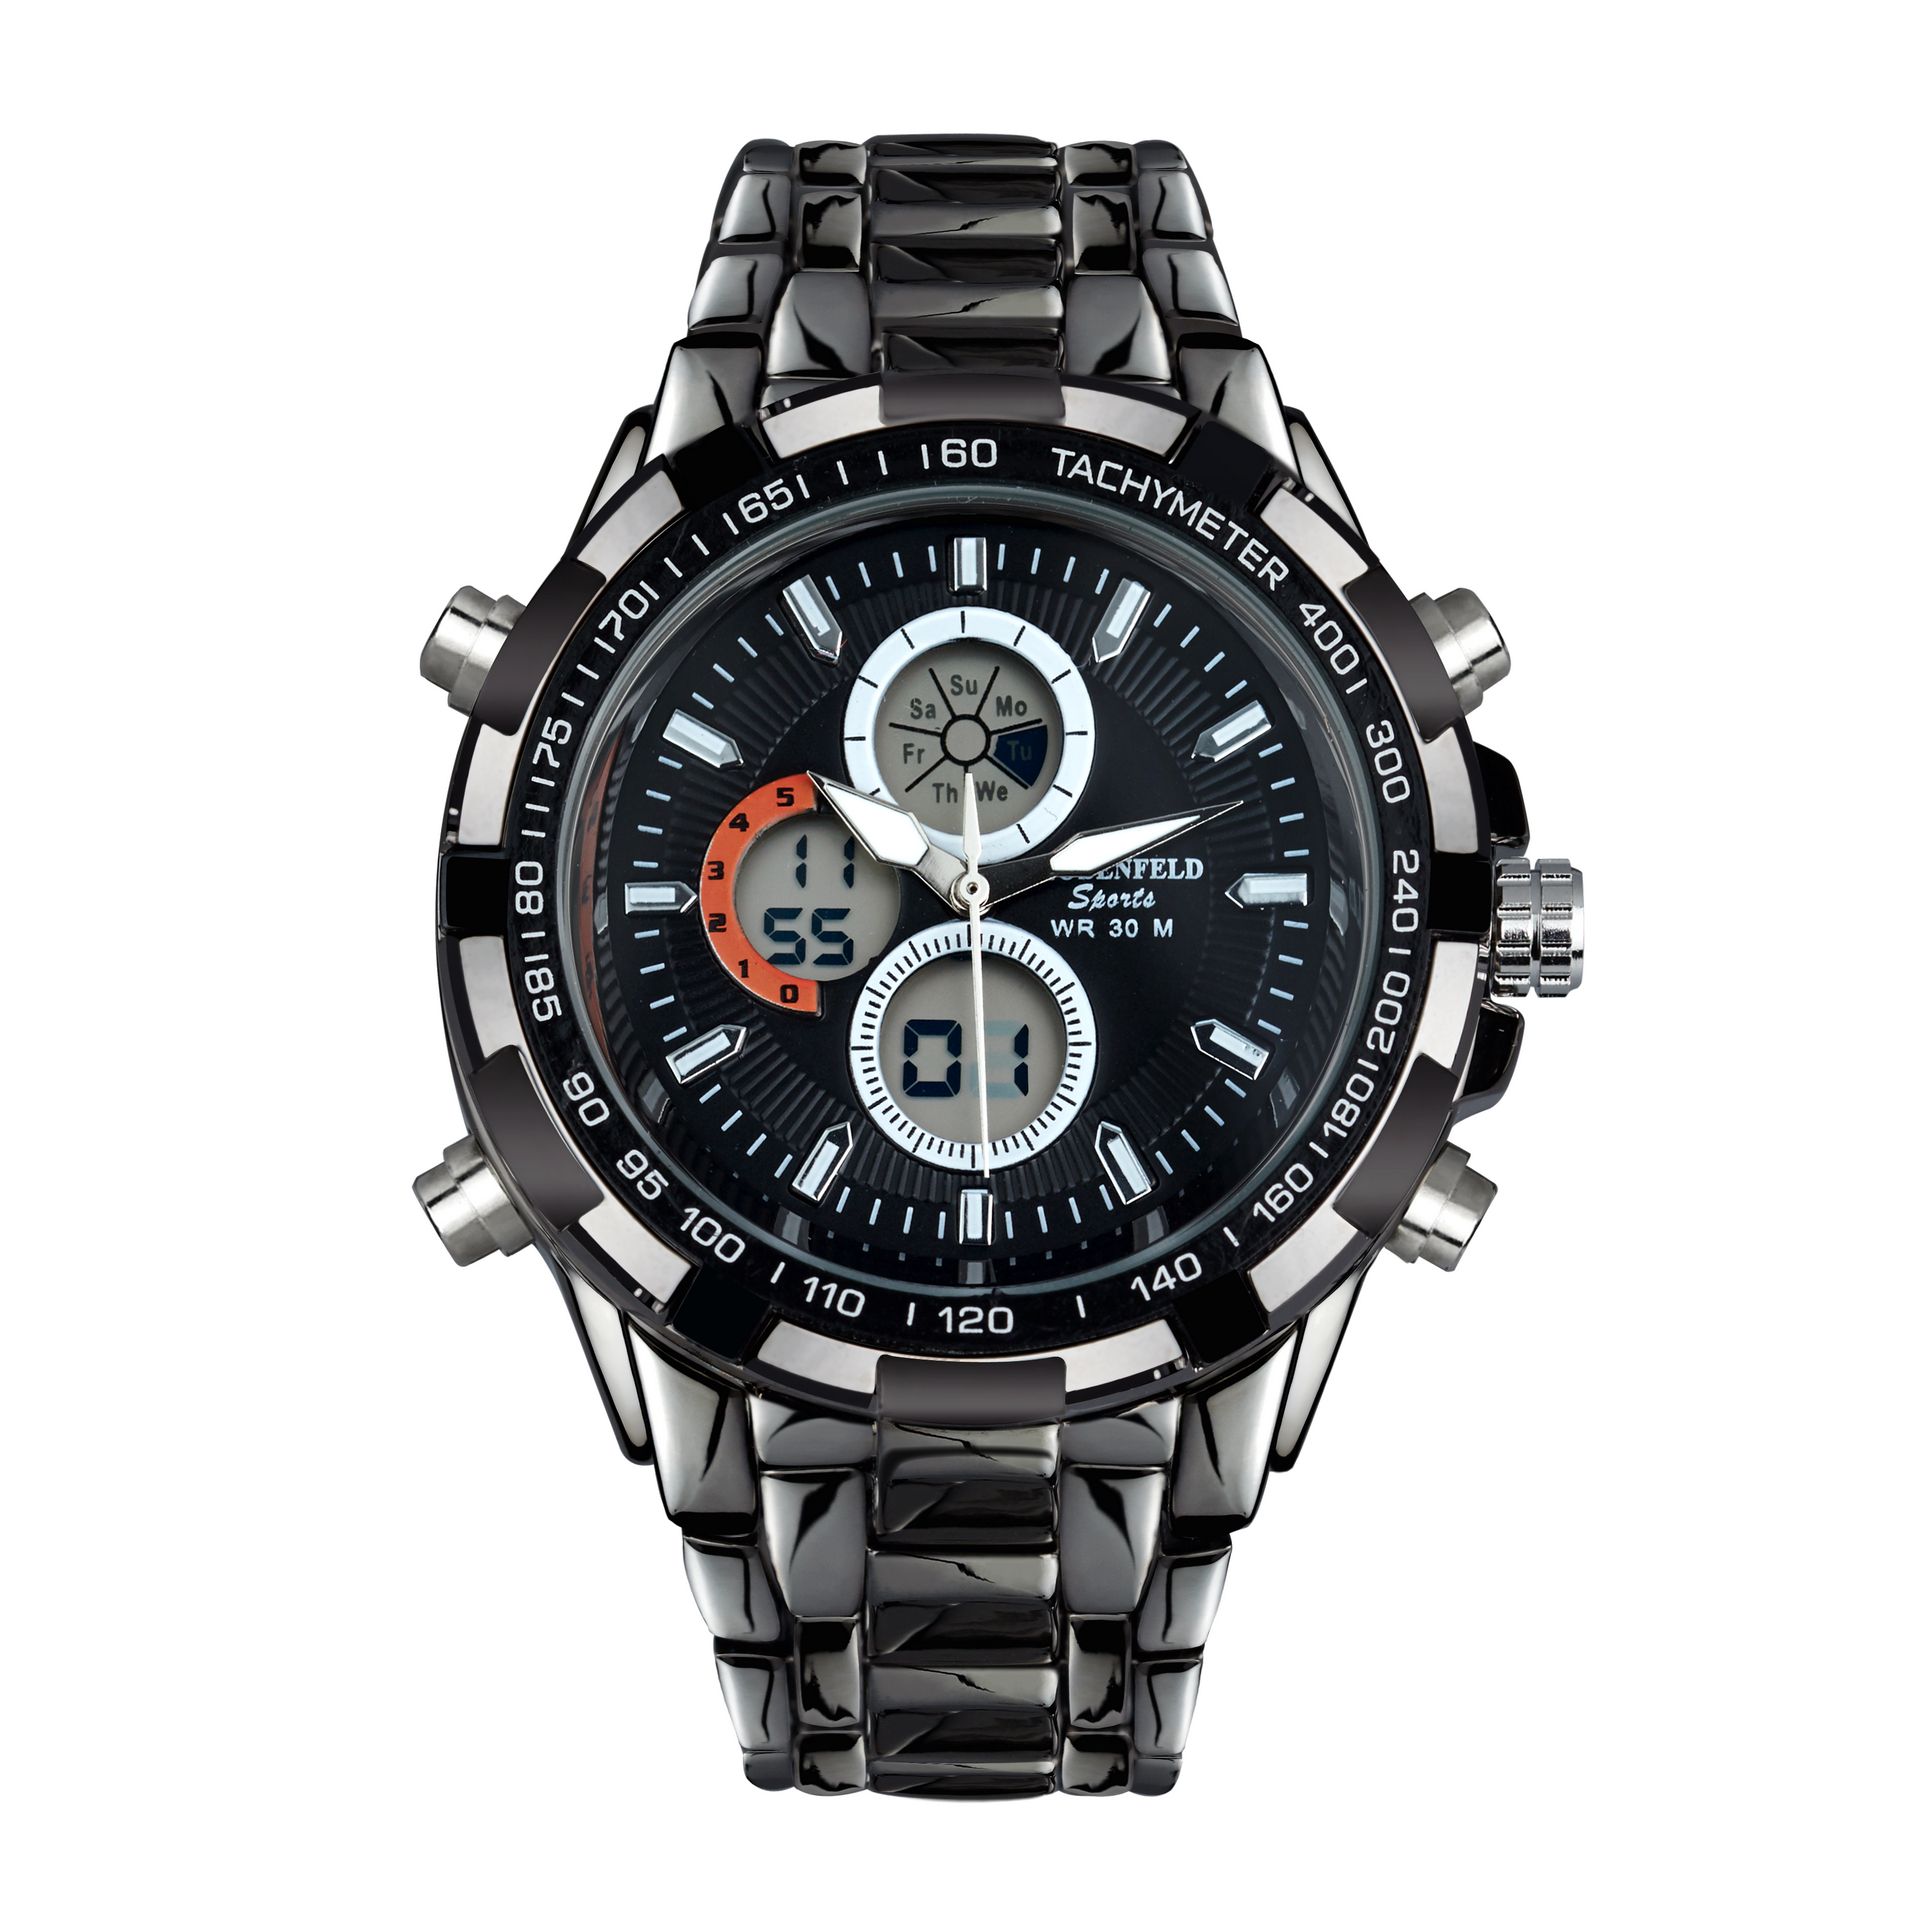 V Brand New Gents Globenfeld Black Super Sports Watch RRP 440.00 With Box - Warranty - Papers Etc (